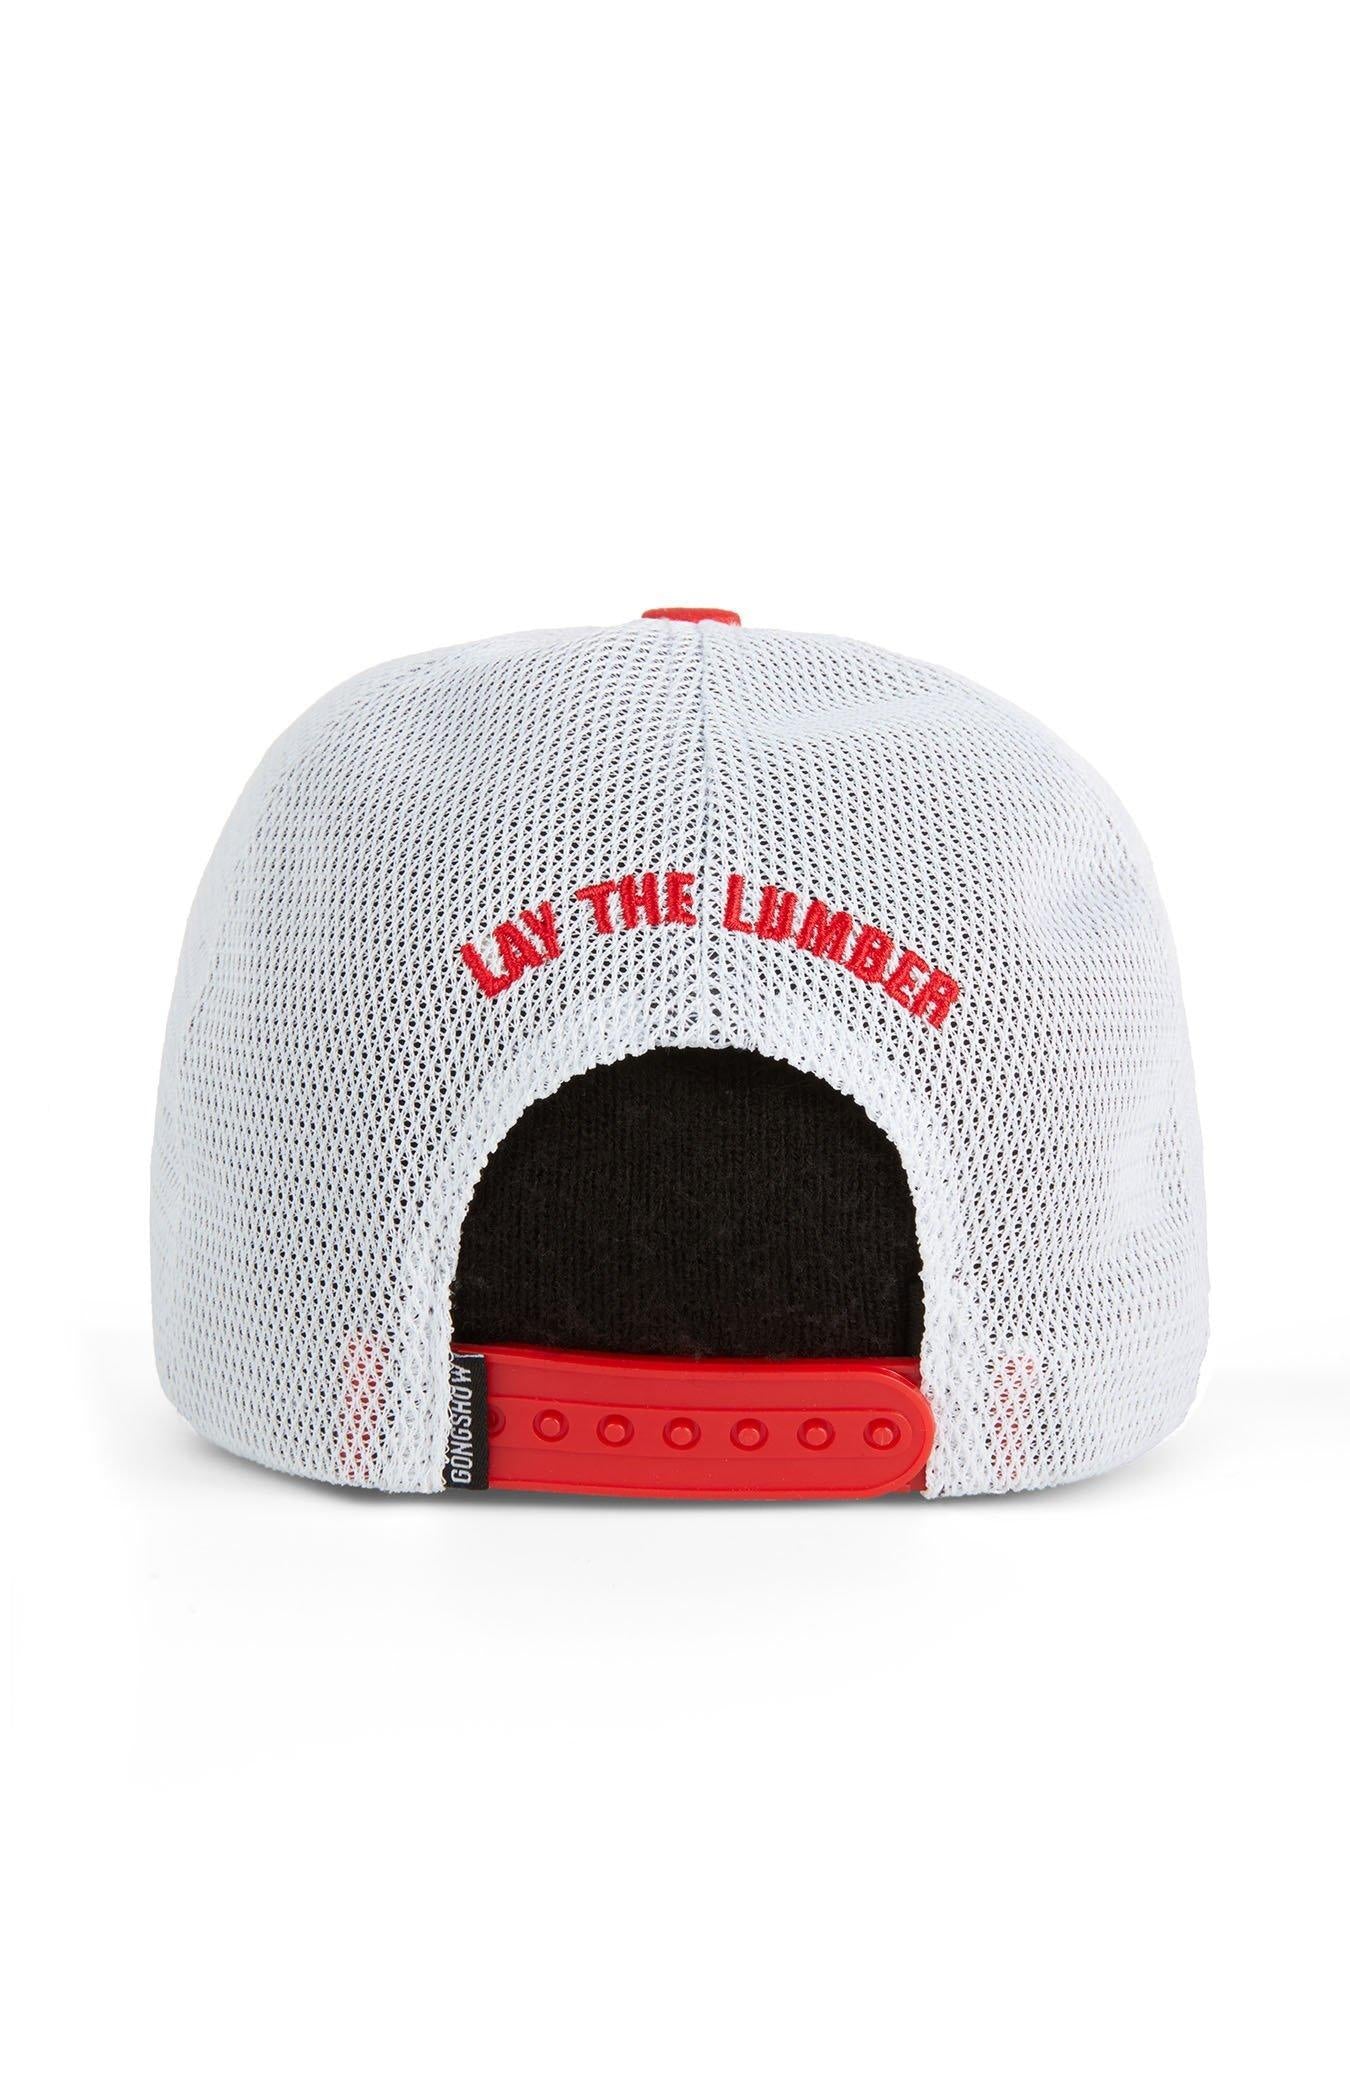 Gongshow Pembroke Lumber Kings Official CCHL Red Hockey Hat – GONGSHOW USA